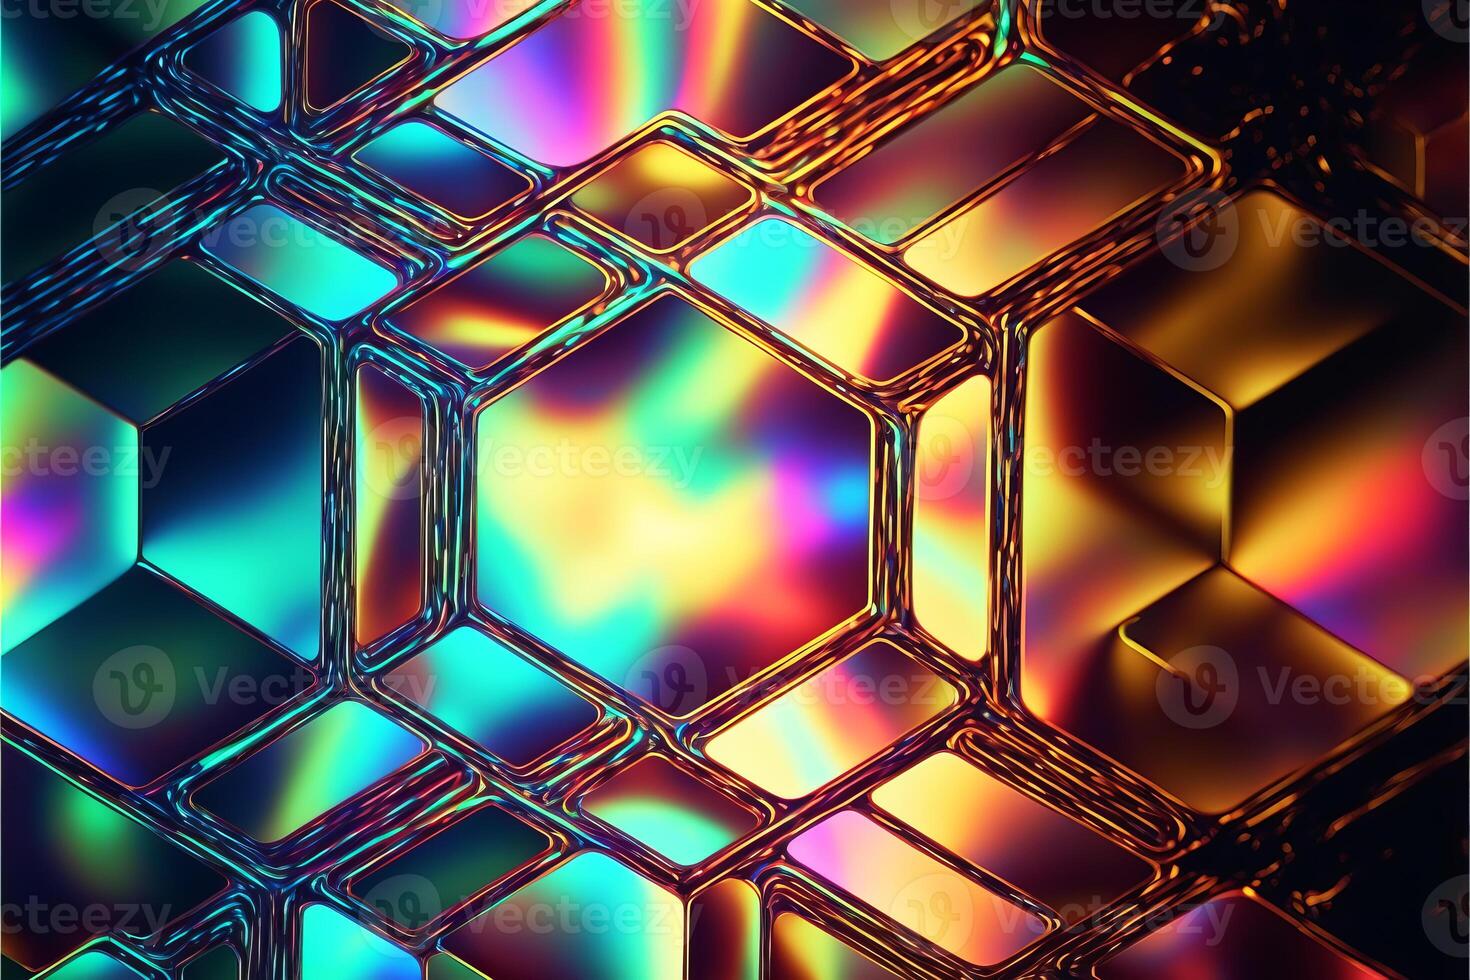 Iridescent holographic textural Background. Geometric cells with iridescent highlights. illustration photo